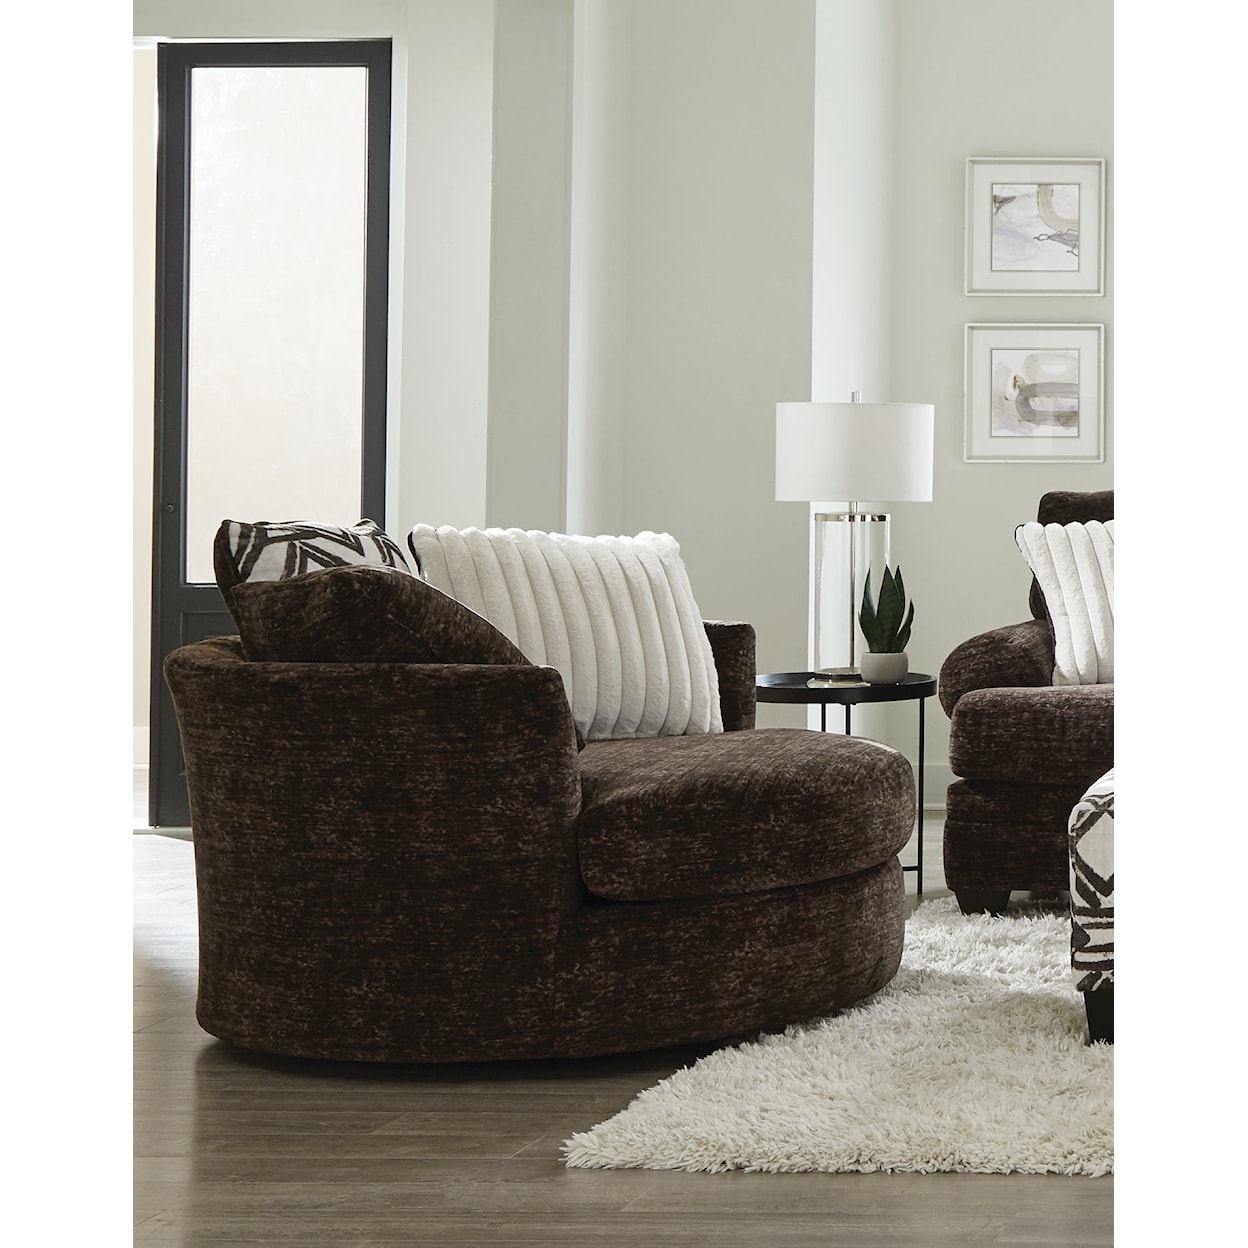 Albany 8642 Upholstered Chairs